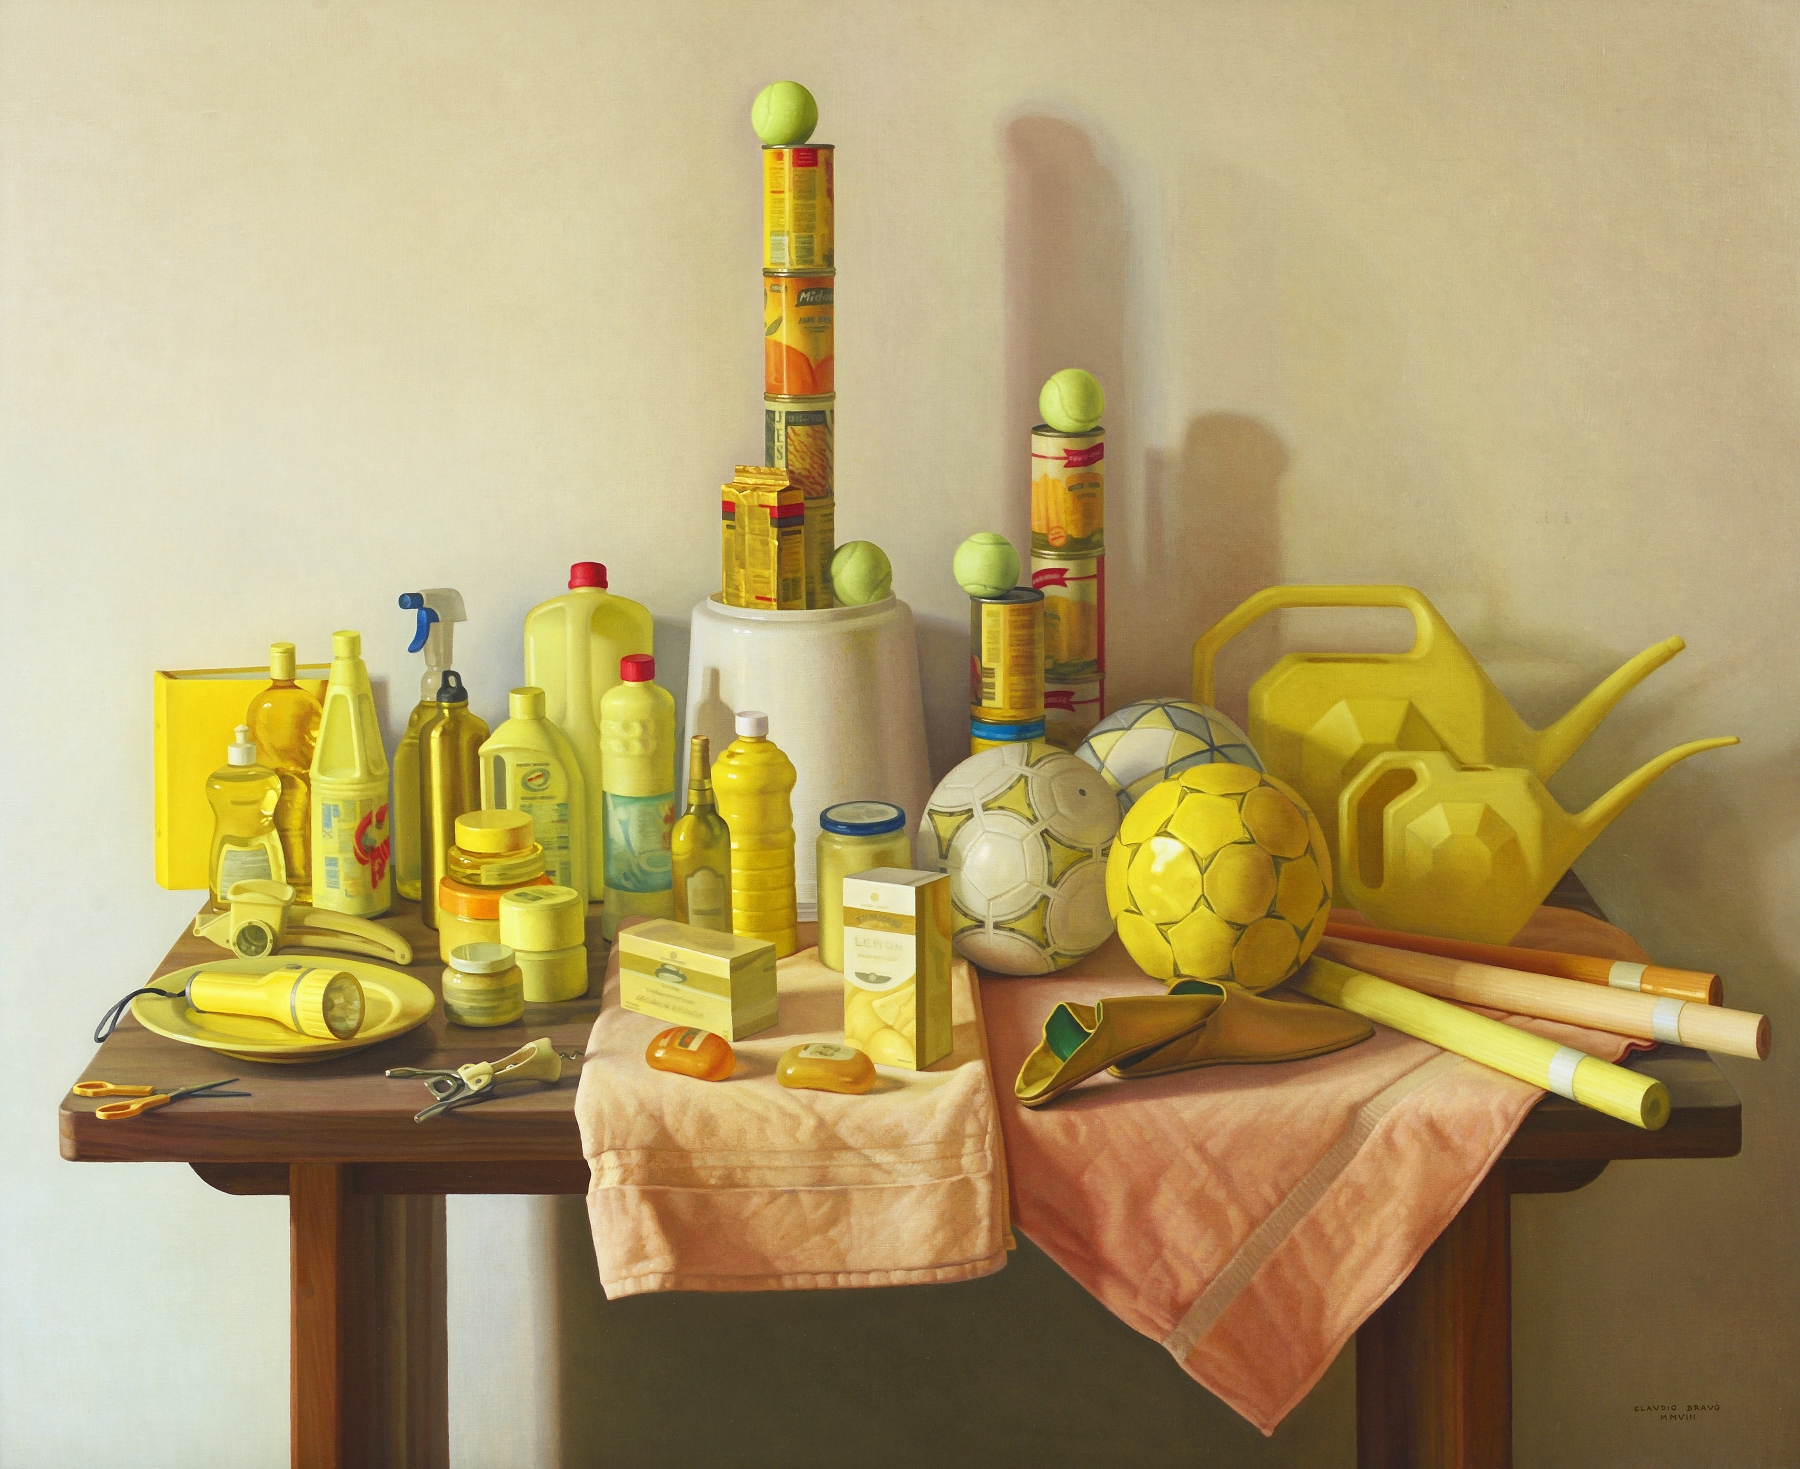 Yellow Marjana, 2008
oil on canvas
51 1/8 x 63 3/4 inches